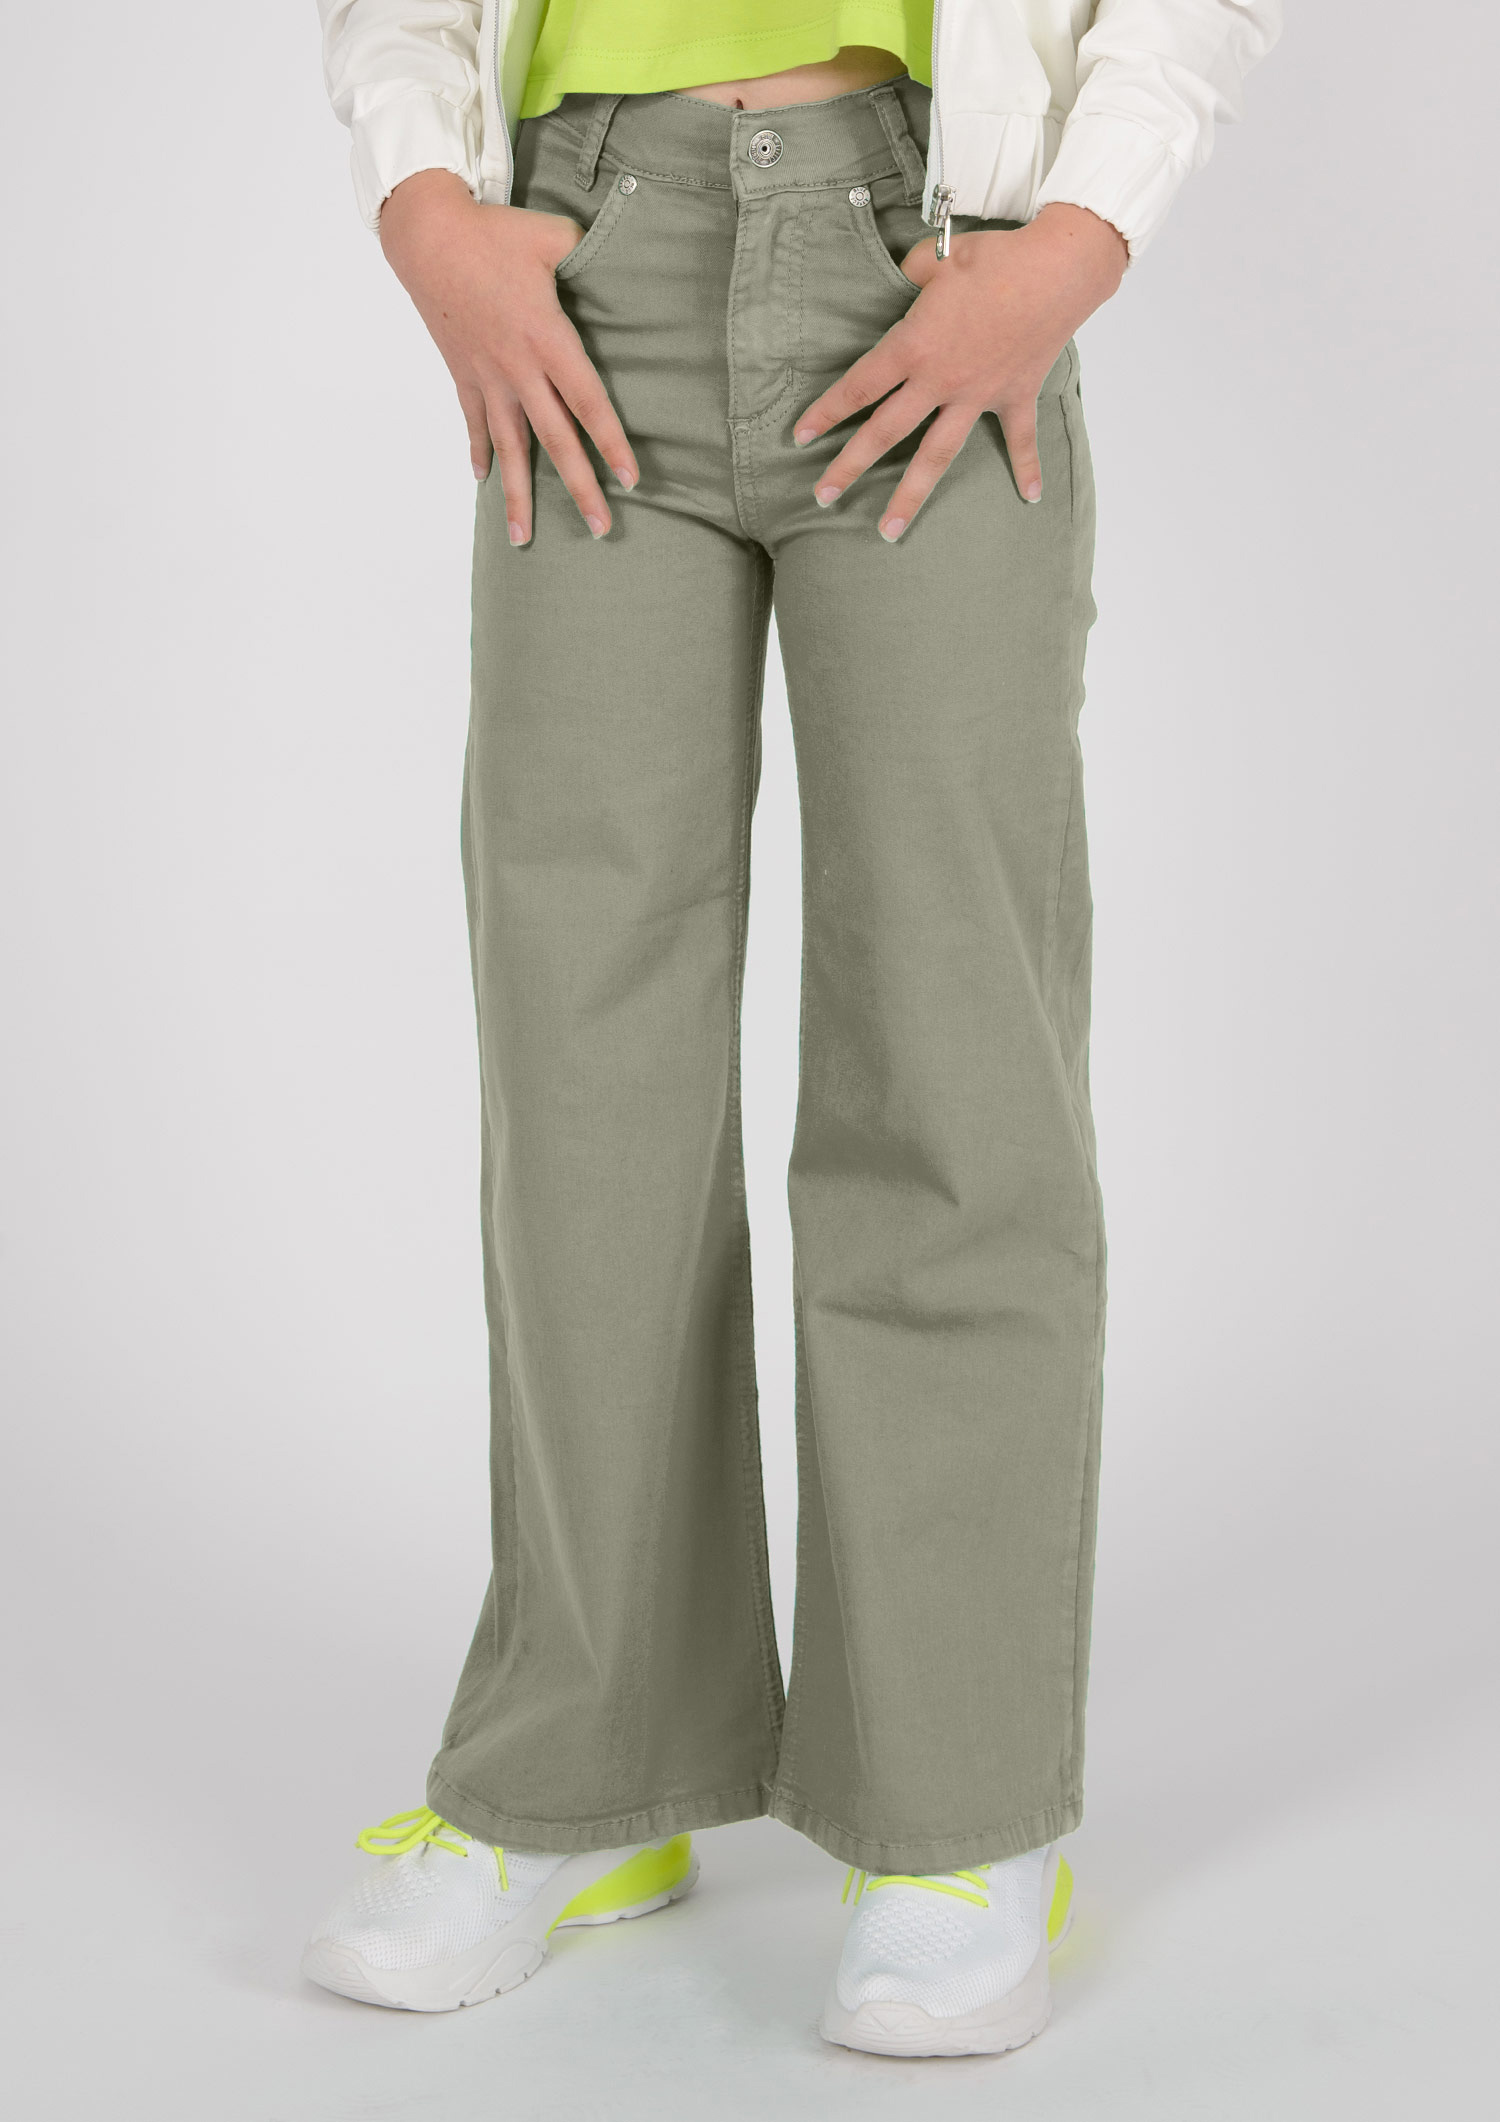 1346-Girls Wide Leg Pant available in Slim,Normal